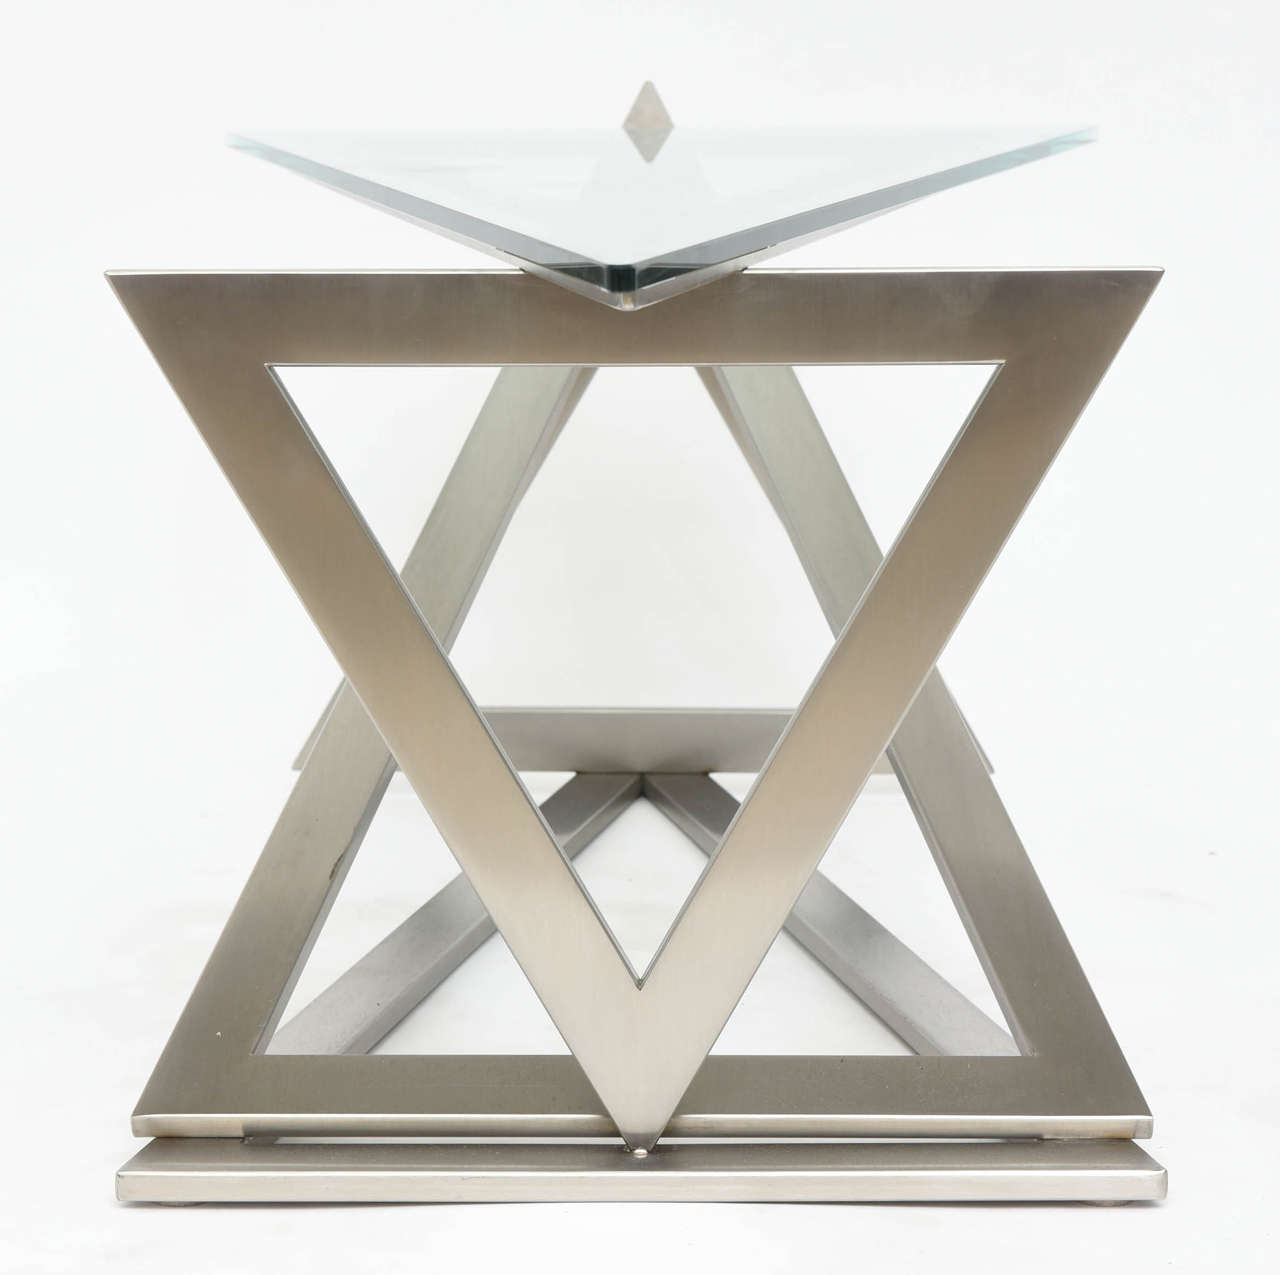 Late 20th Century Italian Modern Stainless Steel and Glass Table Attributed to Giovanni Offredi For Sale